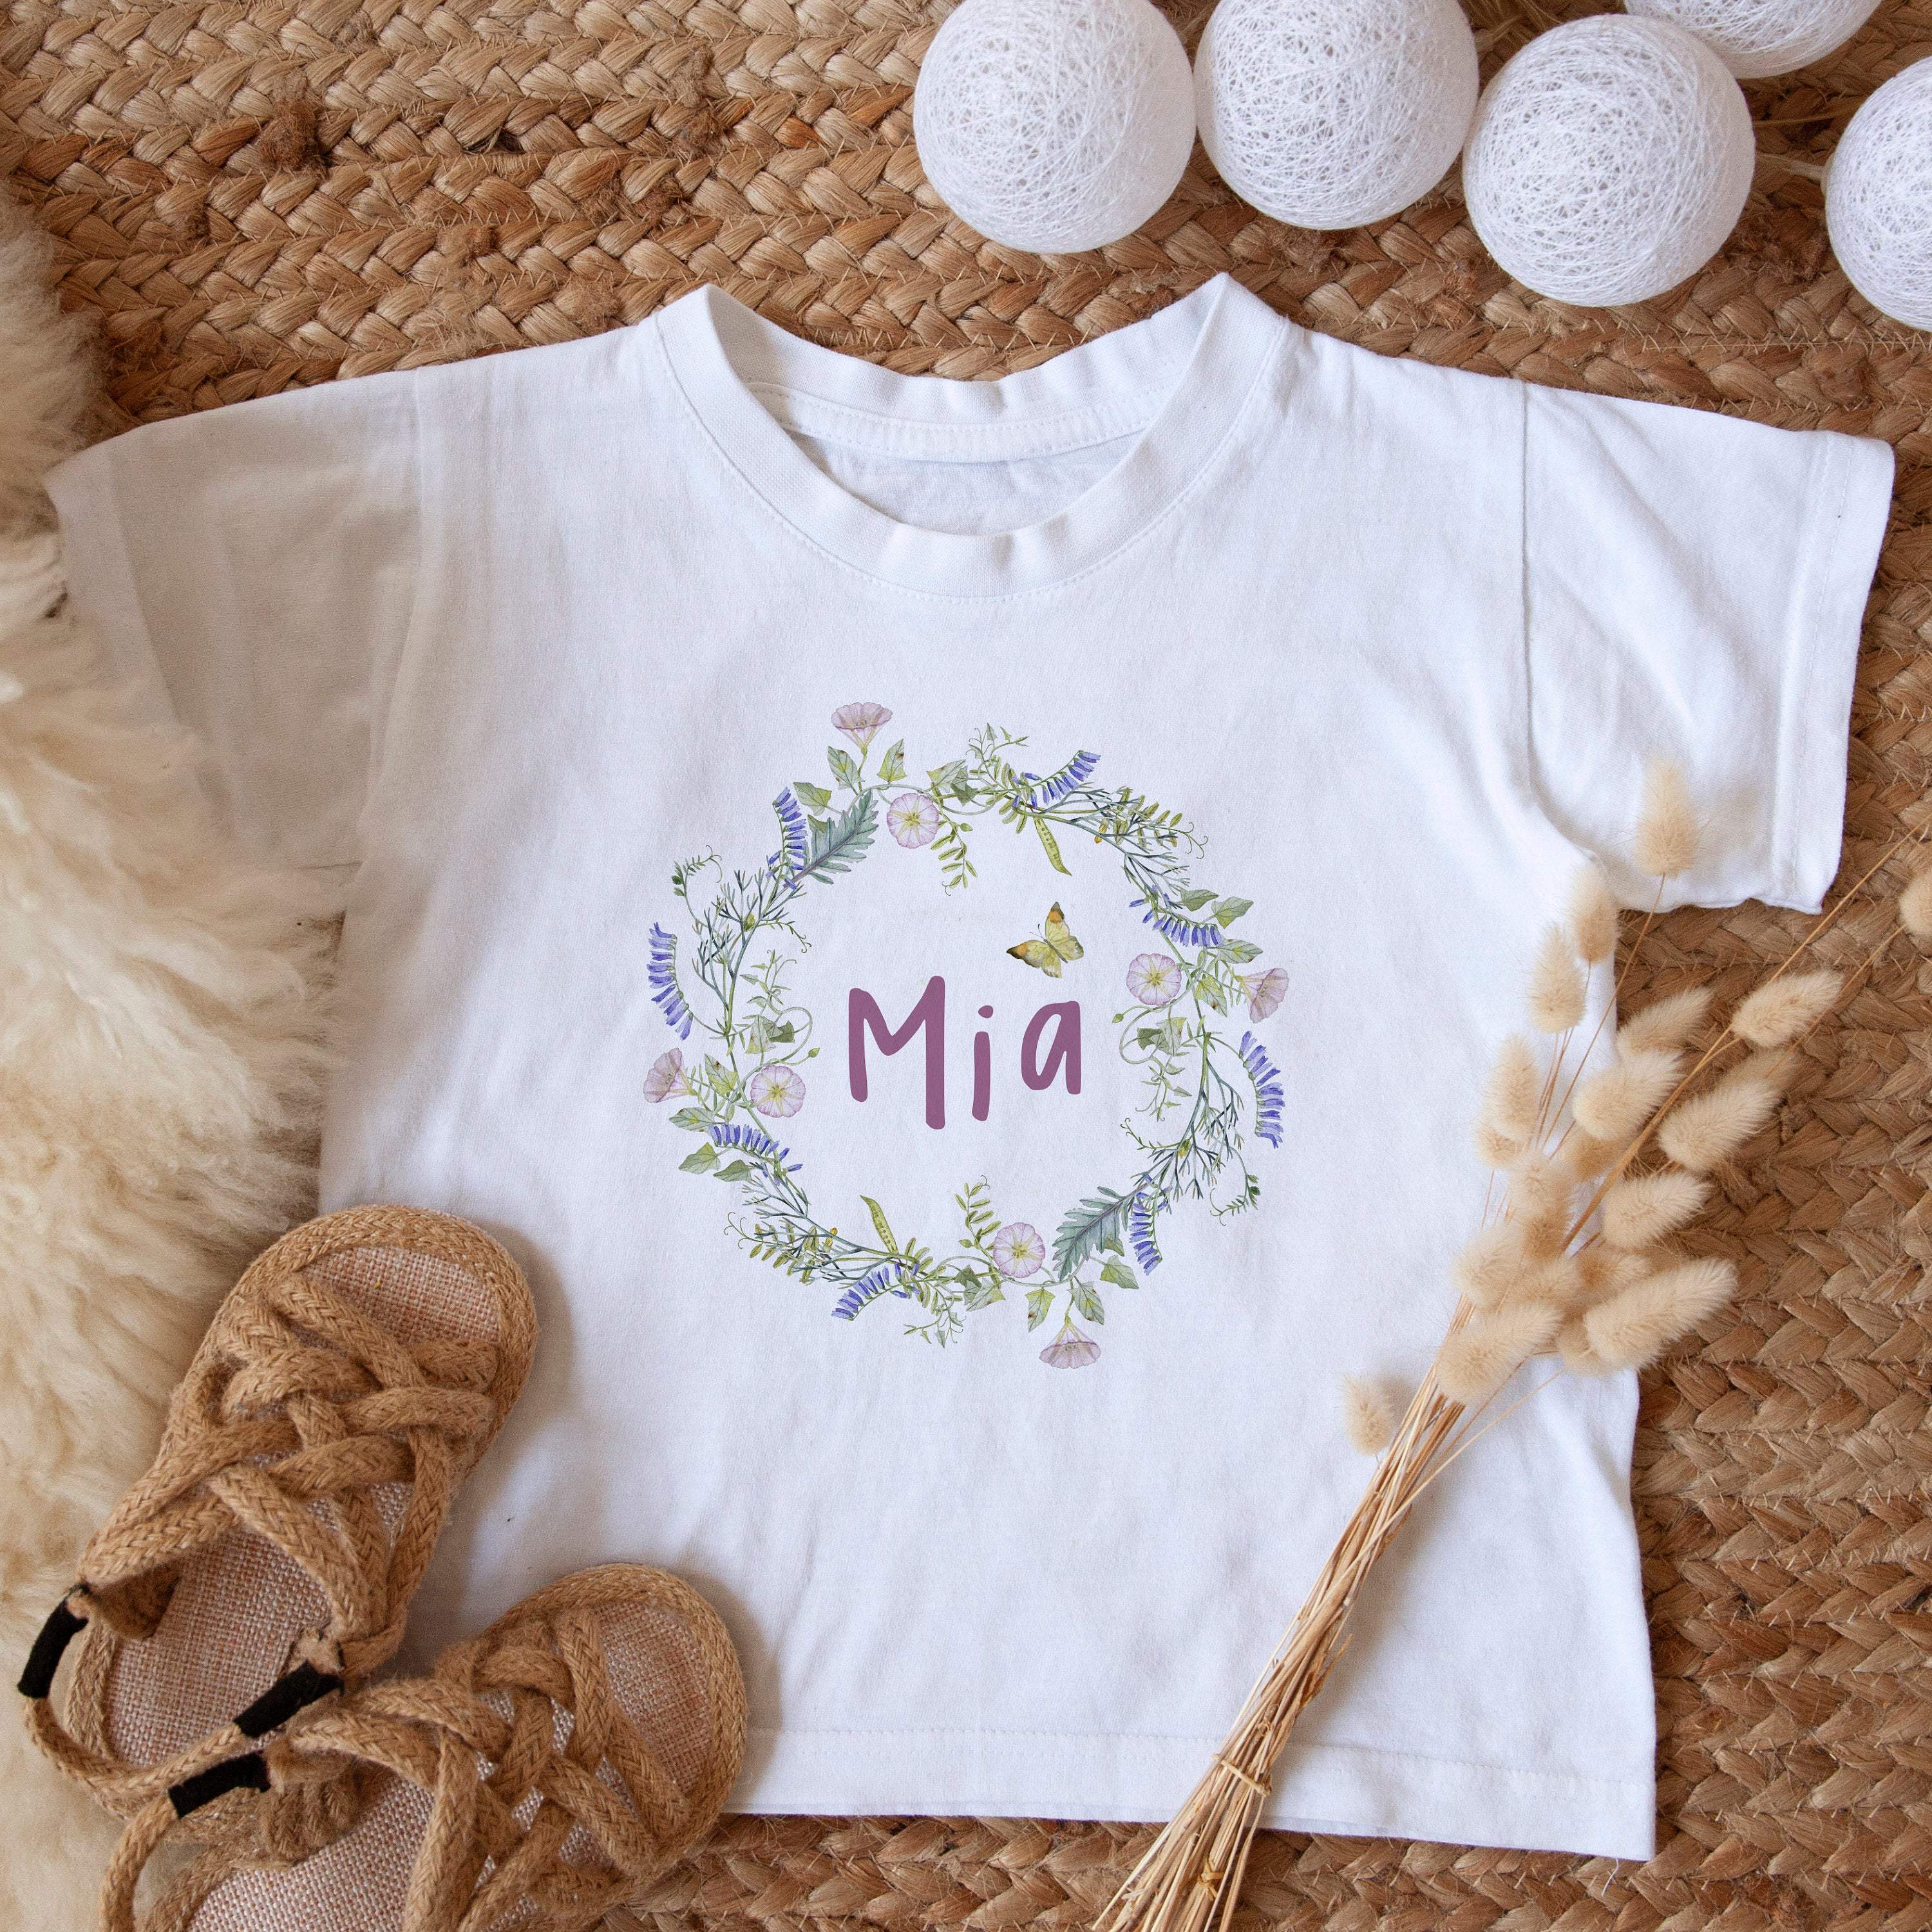 Personalised kids name t-shirt, Birthday boy girl t shirt, top, birthday gift, Flower girl outfit